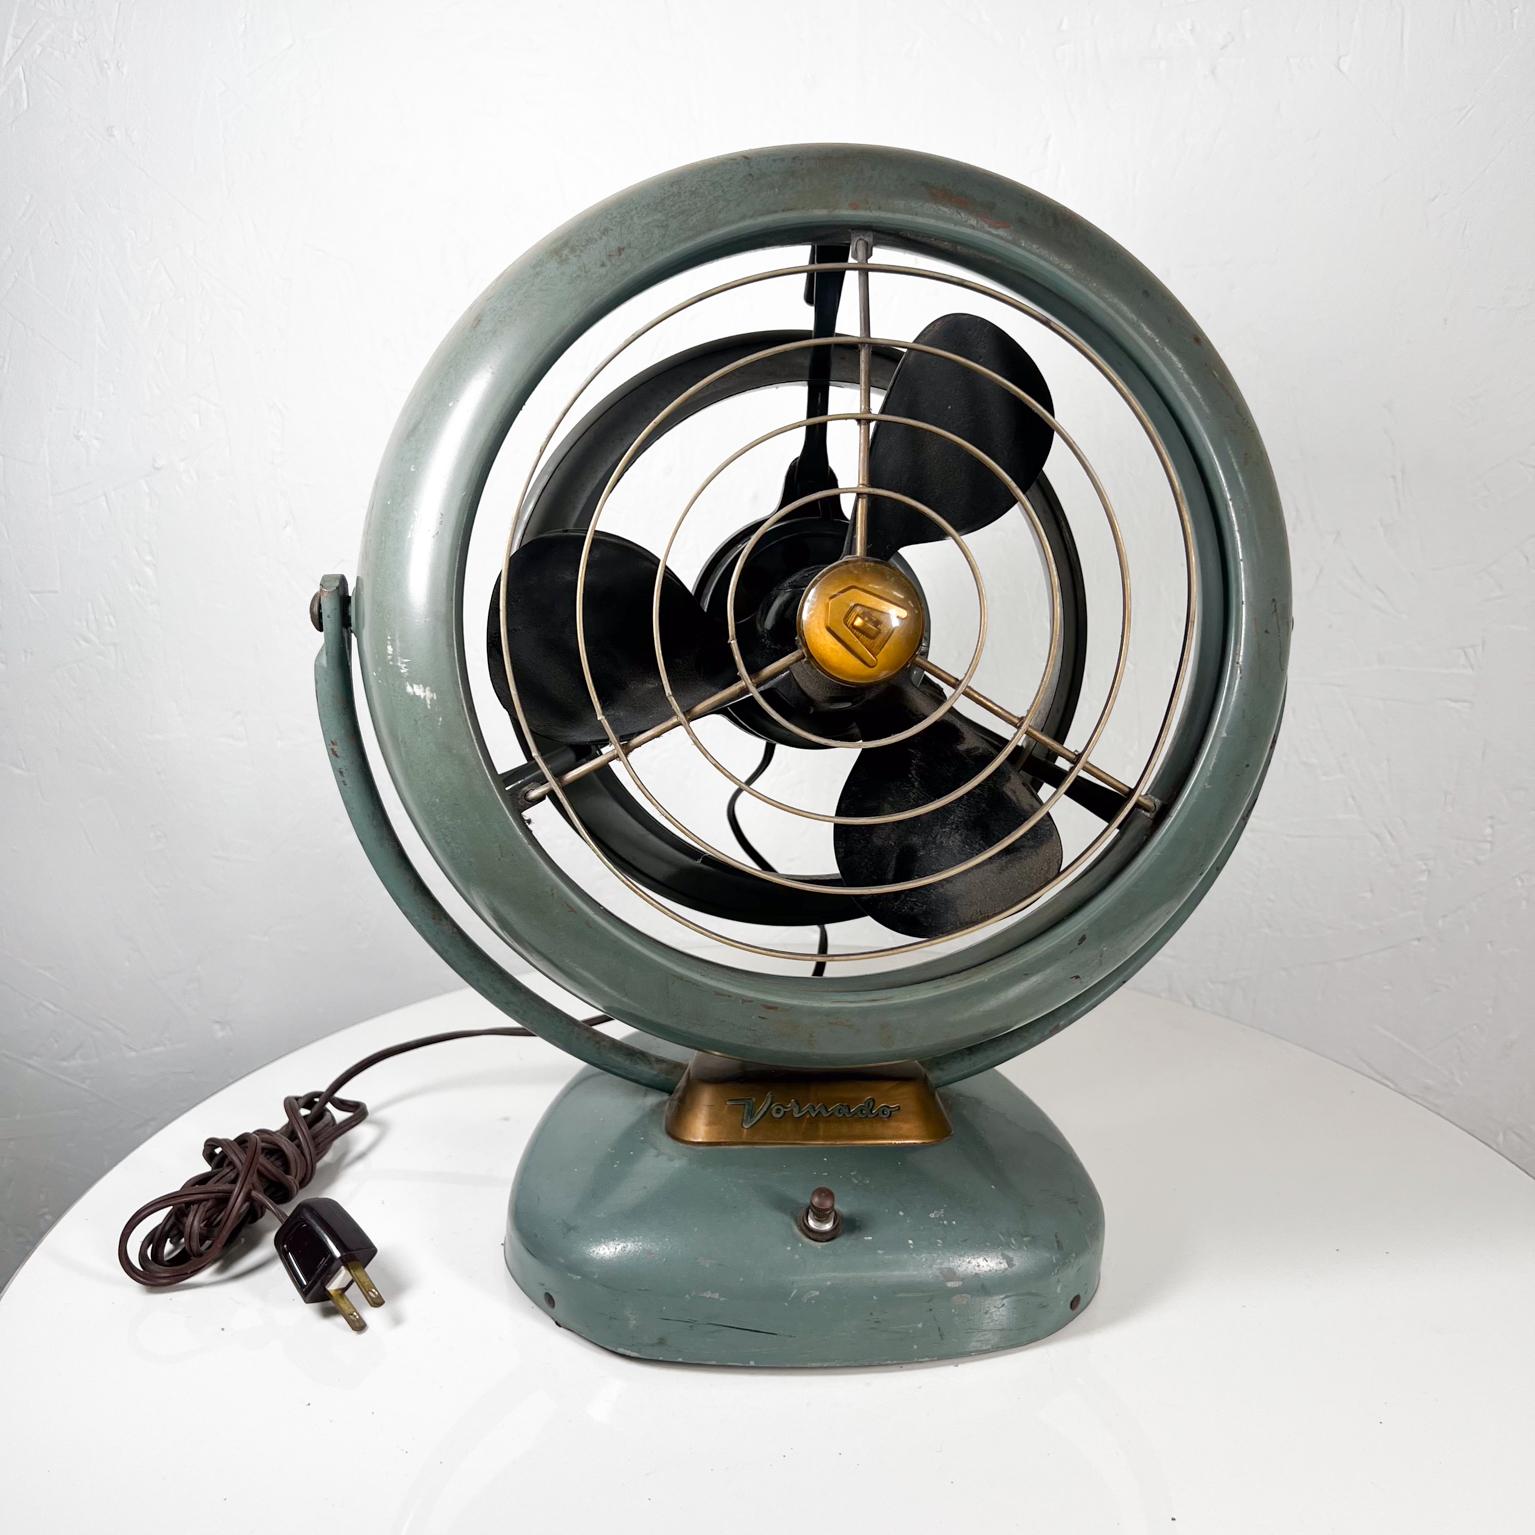 1940s Vornado vintage antique electric fan powerful and silent.
Art Deco era electric green desk tabletop fan
modern industrial design.
16 tall x 16 d x 24 w
Preowned original vintage condition.
Refer to images.